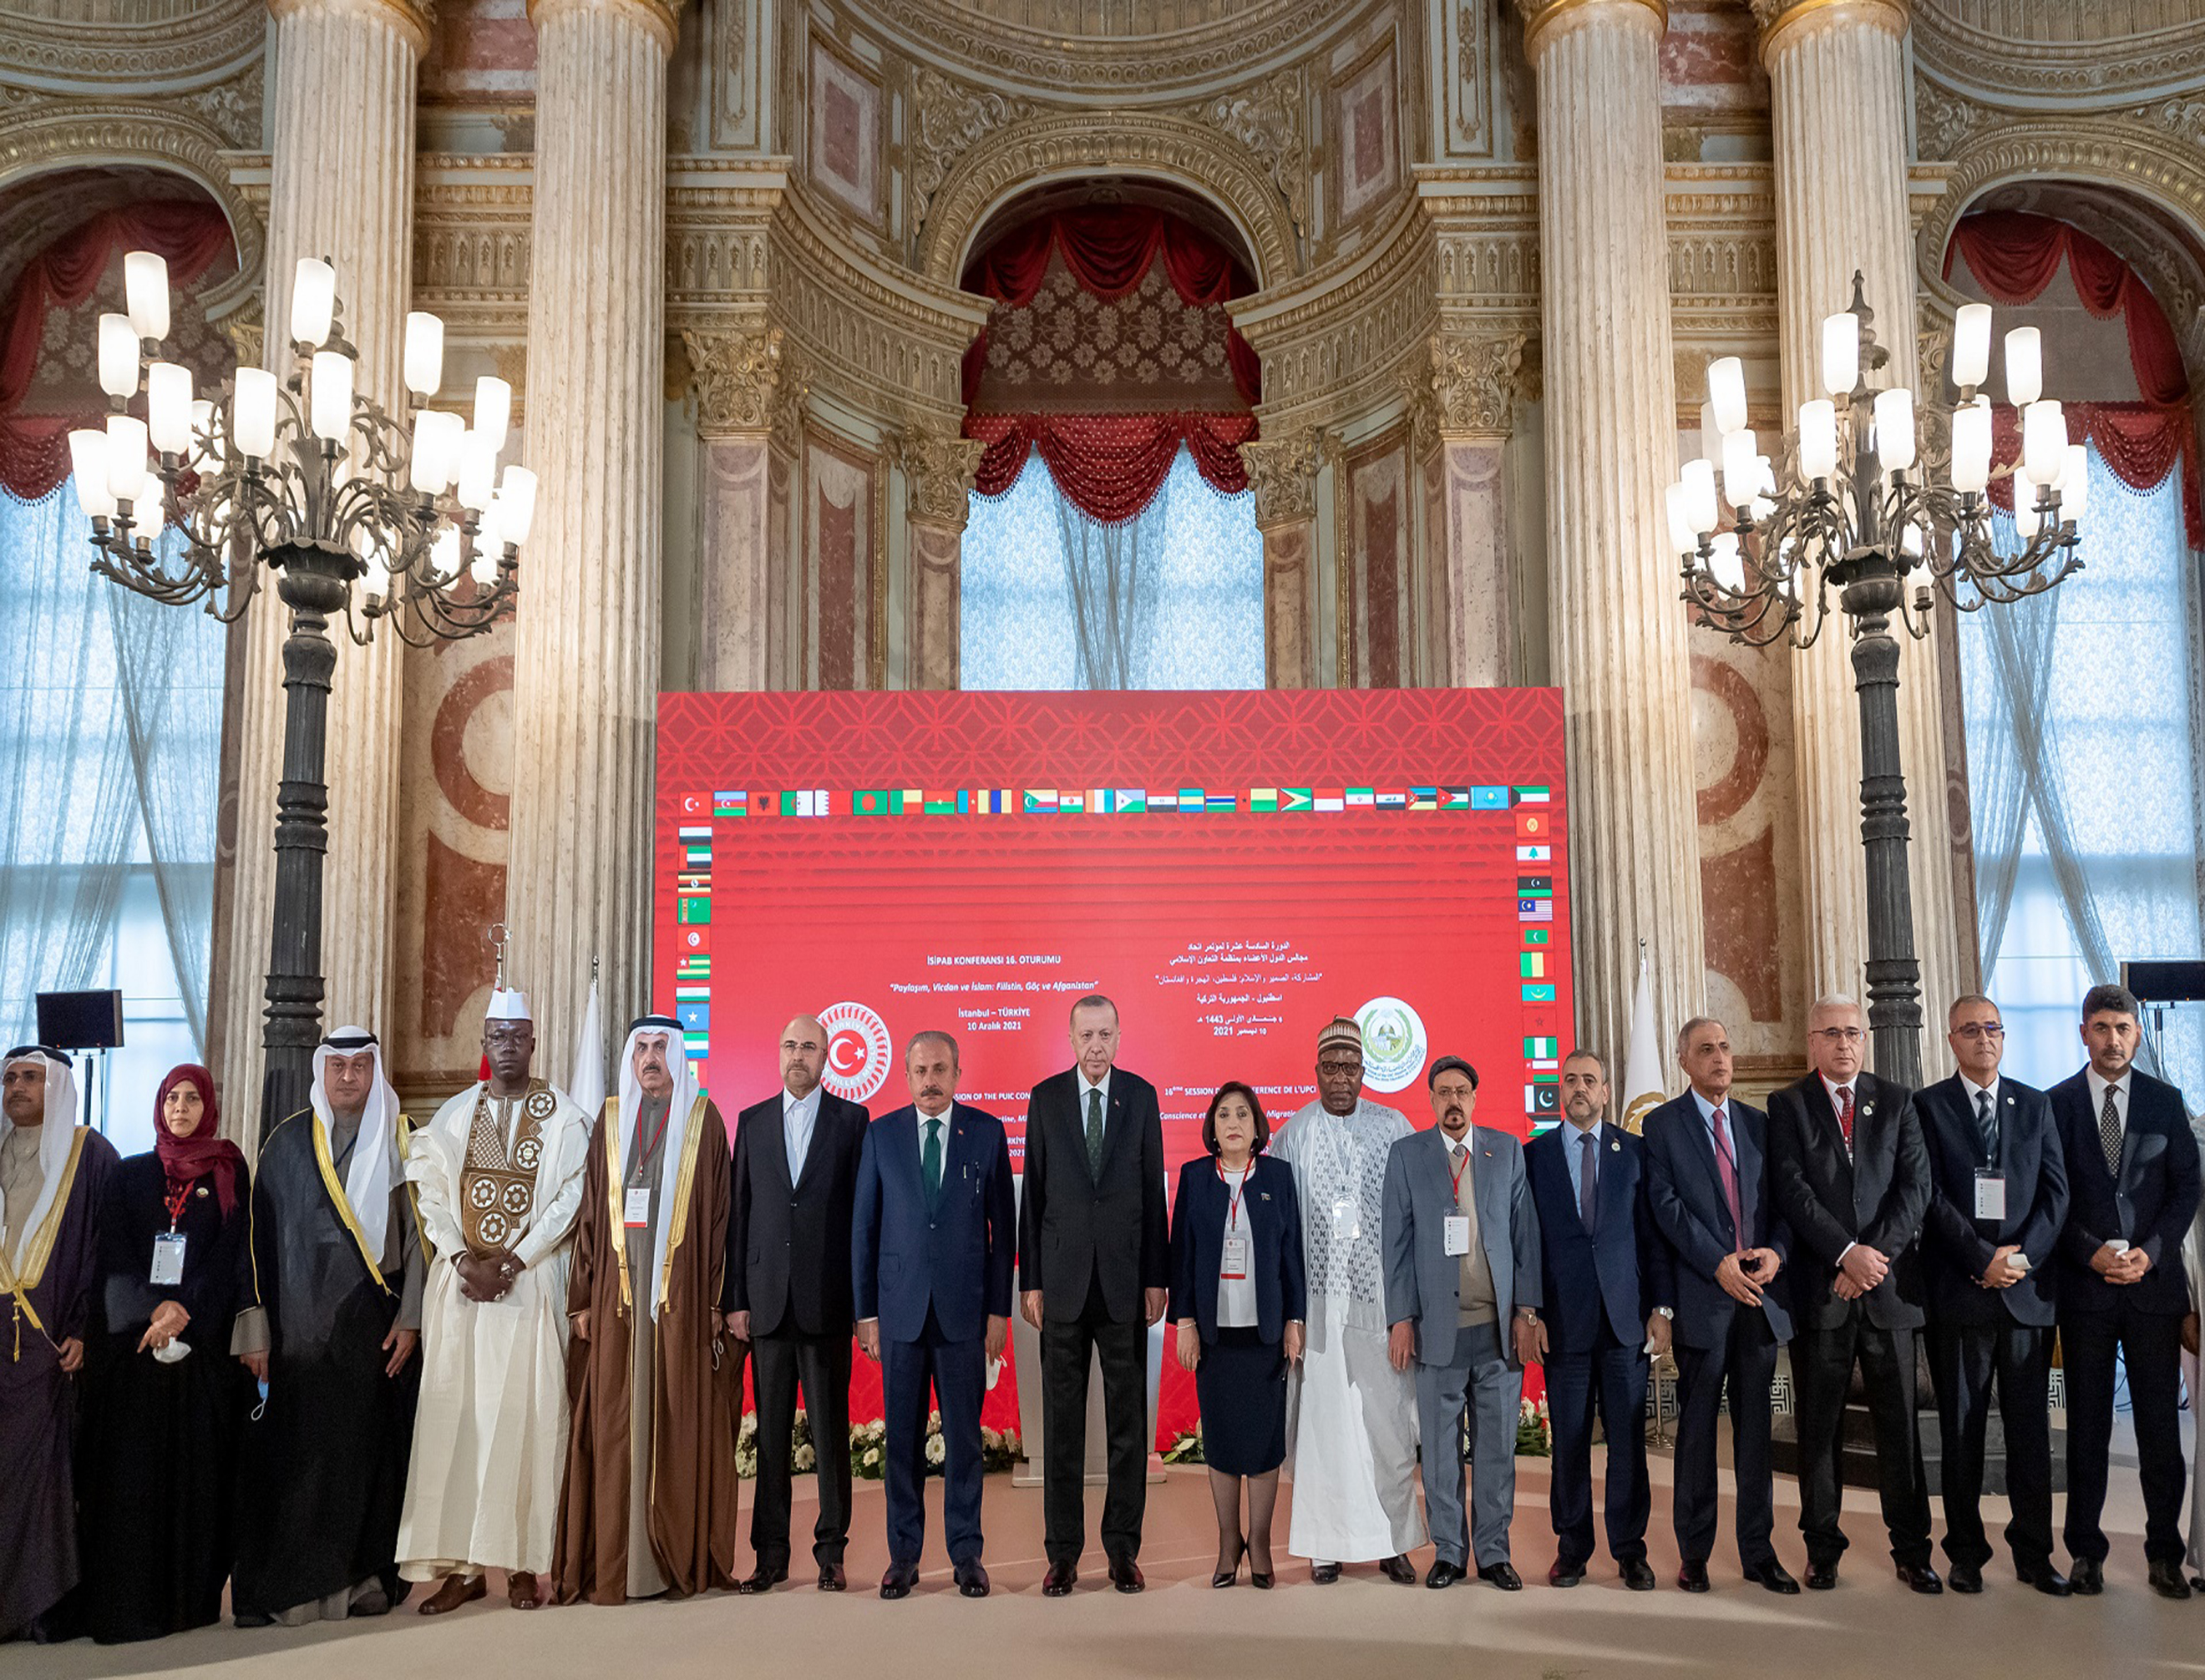 16th Conference of the Parliamentary Union of the OIC Member States (PUIC)